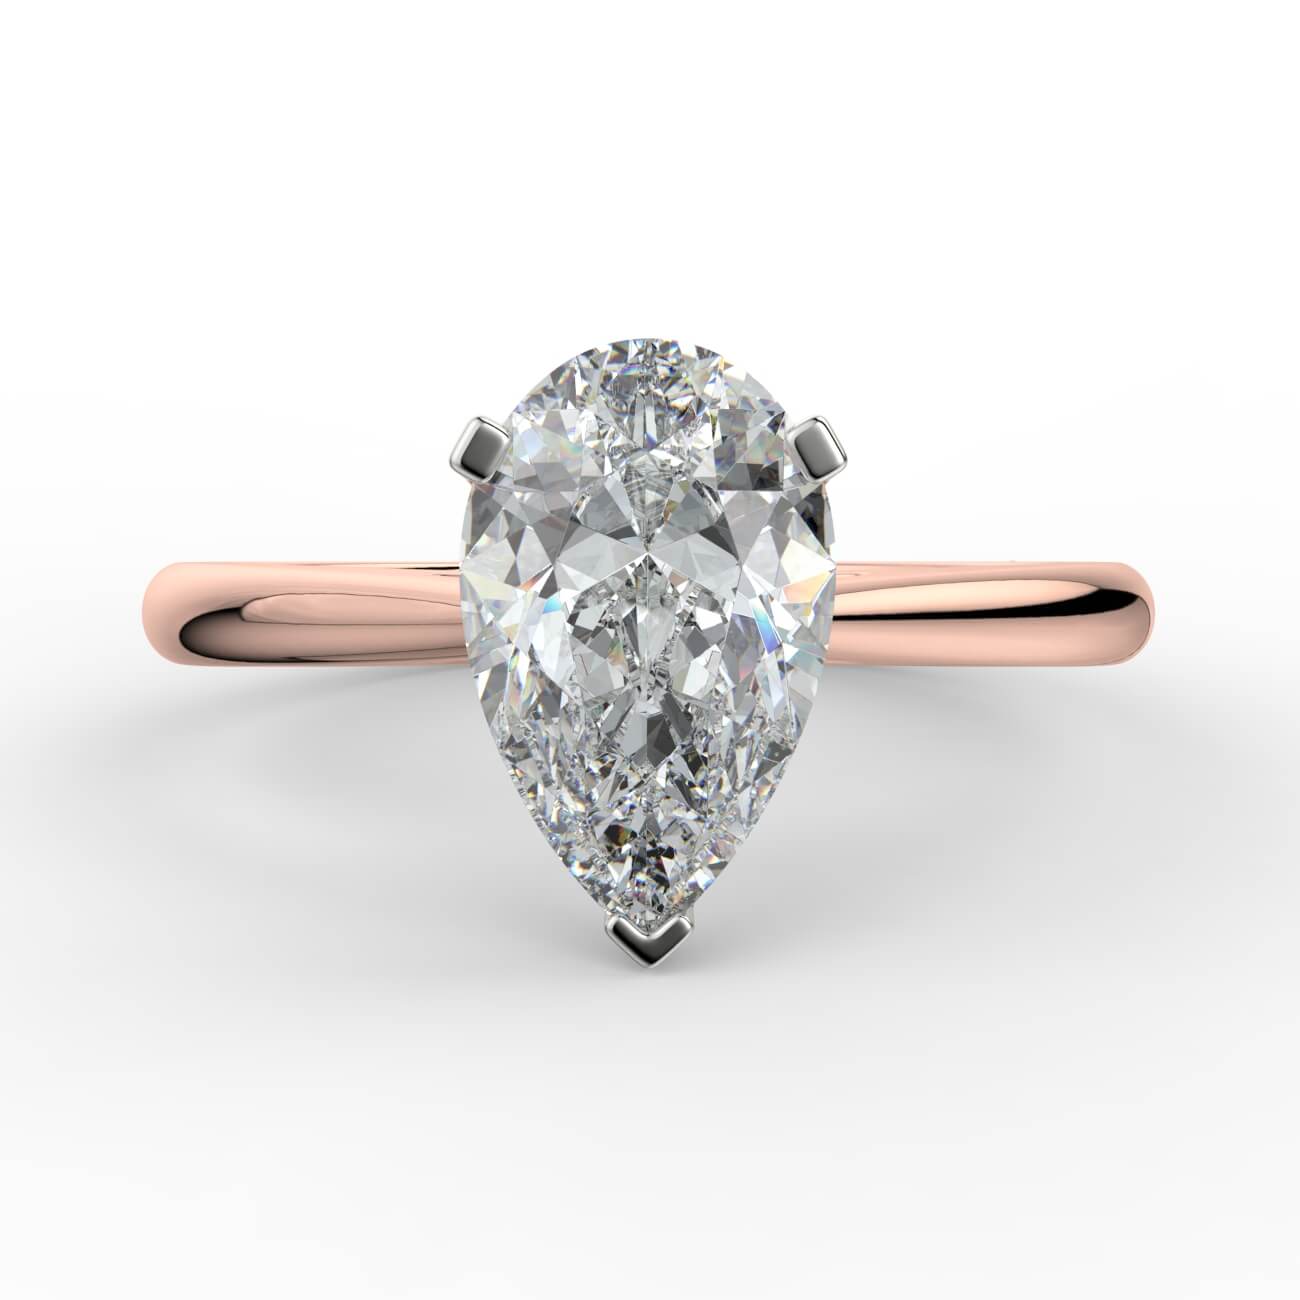 Pear cut diamond cathedral engagement ring in white and rose gold – Australian Diamond Network